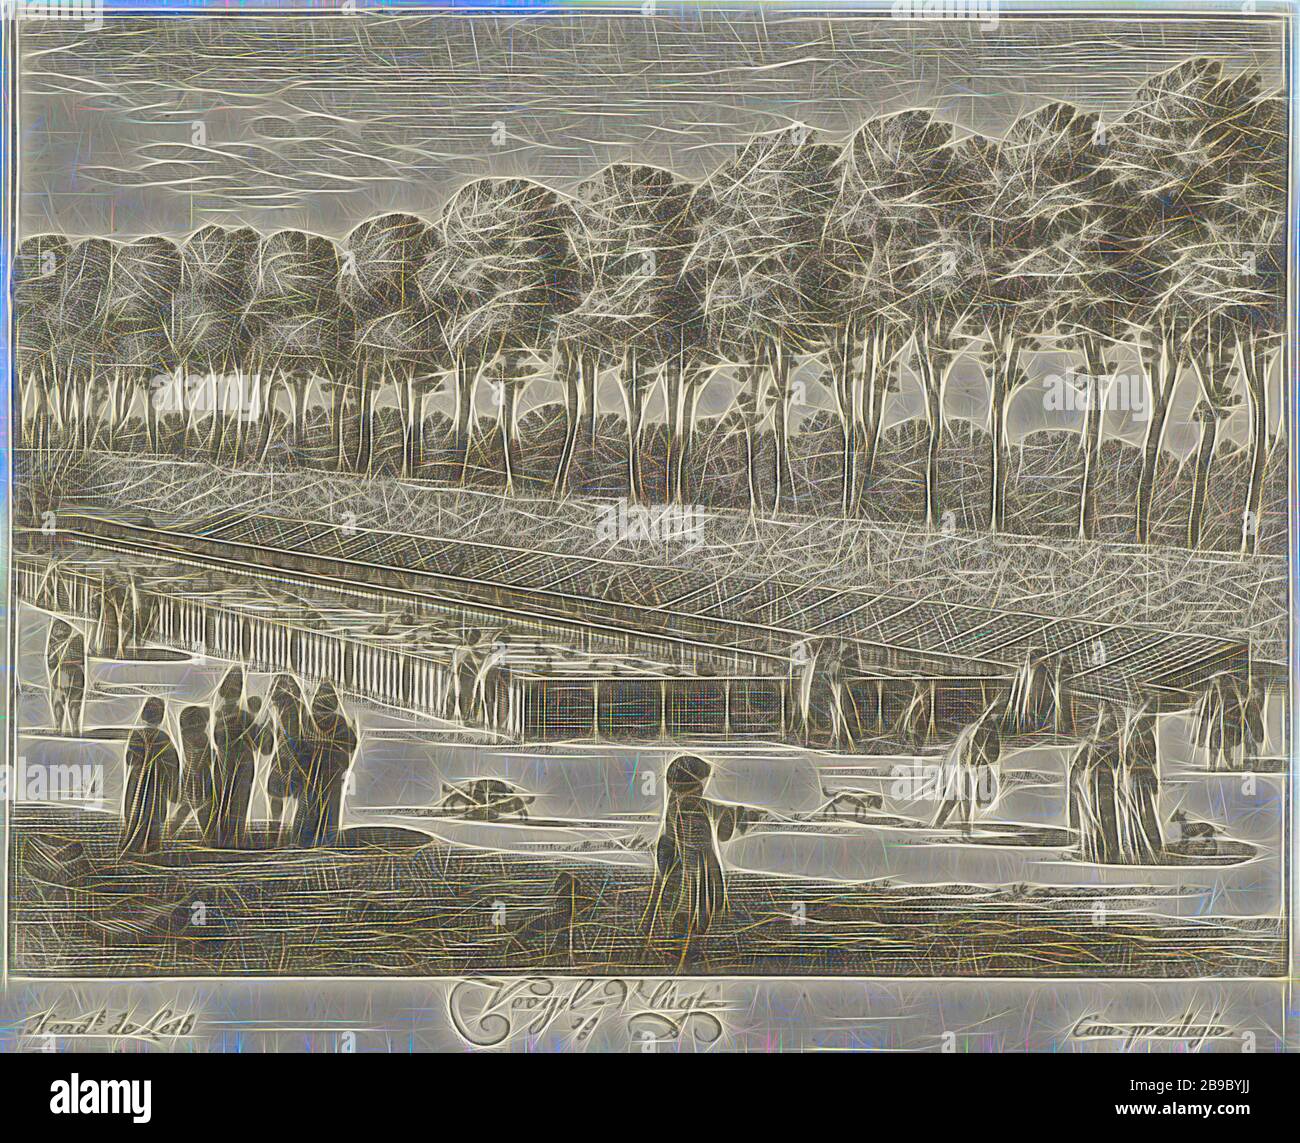 Duck pond of Soestdijk Palace Voogel-Vlugt (title on object) Generale Afbeeldinge Vant Lust-Huijs and Hof van sijn Royal Majesty of Great Britain t Soest-Dijk (series title), View of the duck pond in the garden of Soestdijk Palace, with walking figures. The print is part of a series with sixteen faces at Soestdijk Palace and the accompanying estate, palace, water-birds: duck, pond, pool (variant), Soestdijk, Hendrik de Leth (mentioned on object), 1725 - 1747, paper, etching, h 135 mm × w 160 mm, Reimagined by Gibon, design of warm cheerful glowing of brightness and light rays radiance. Classic Stock Photo